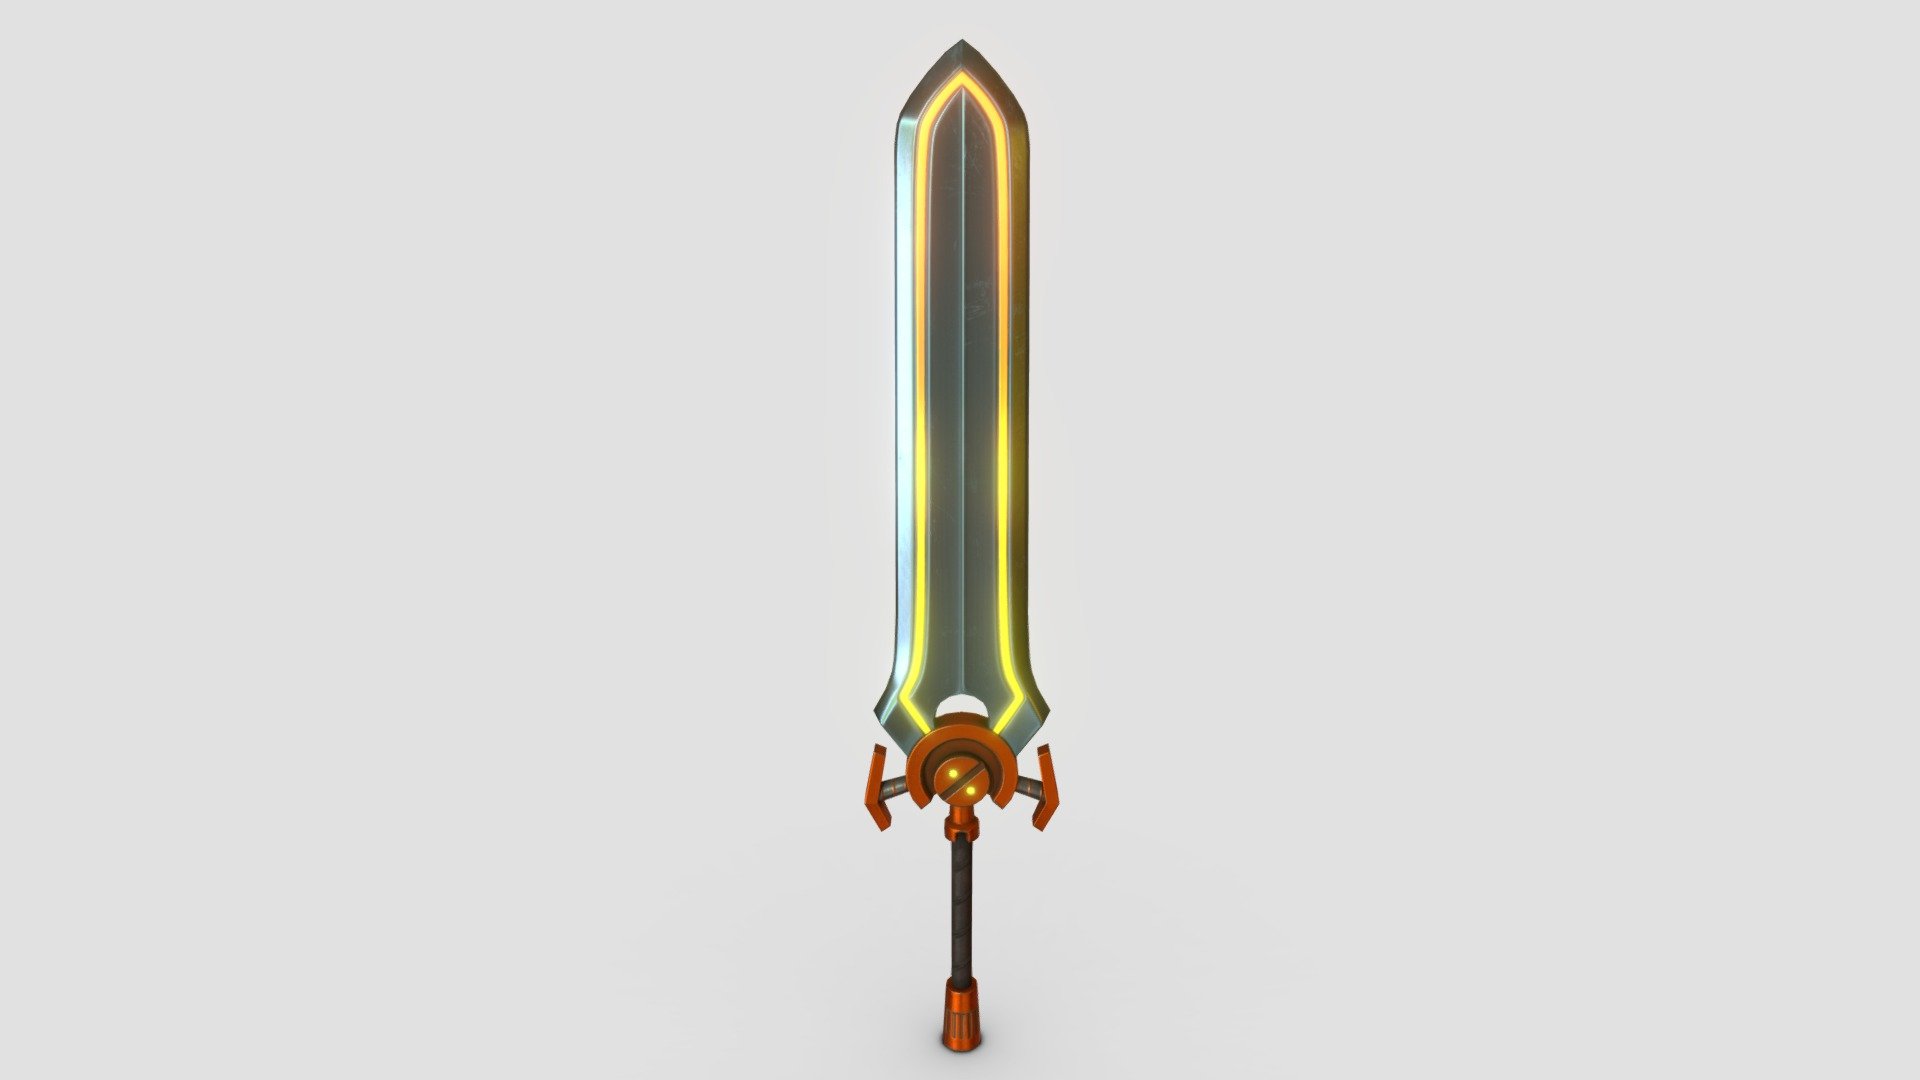 low poly game ready to use.

the file include:

Unreal textures.

unity textures.

all 2048 x 4096

pivot model is (0,0,0), in real world scale.

more images visit :

https://www.artstation.com/artwork/1mkd8 - Light Sword - Buy Royalty Free 3D model by KloWorks 3d model